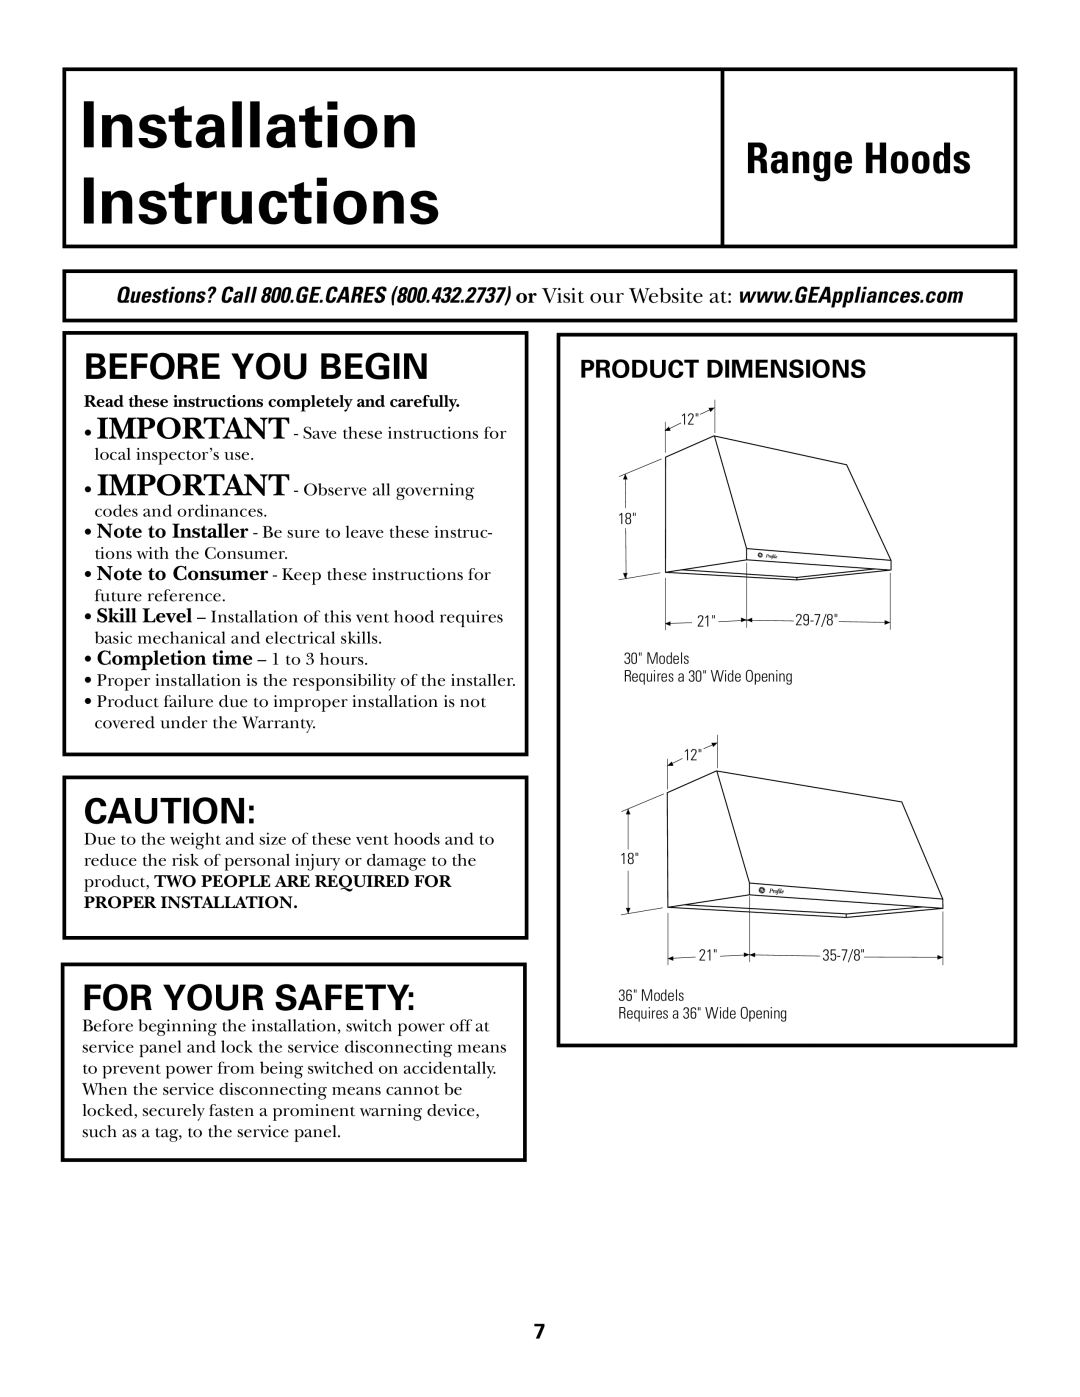 GE JV936, JV965, JV966 Before You Begin, For Your Safety, Product Dimensions, Installation Instructions, Range Hoods 